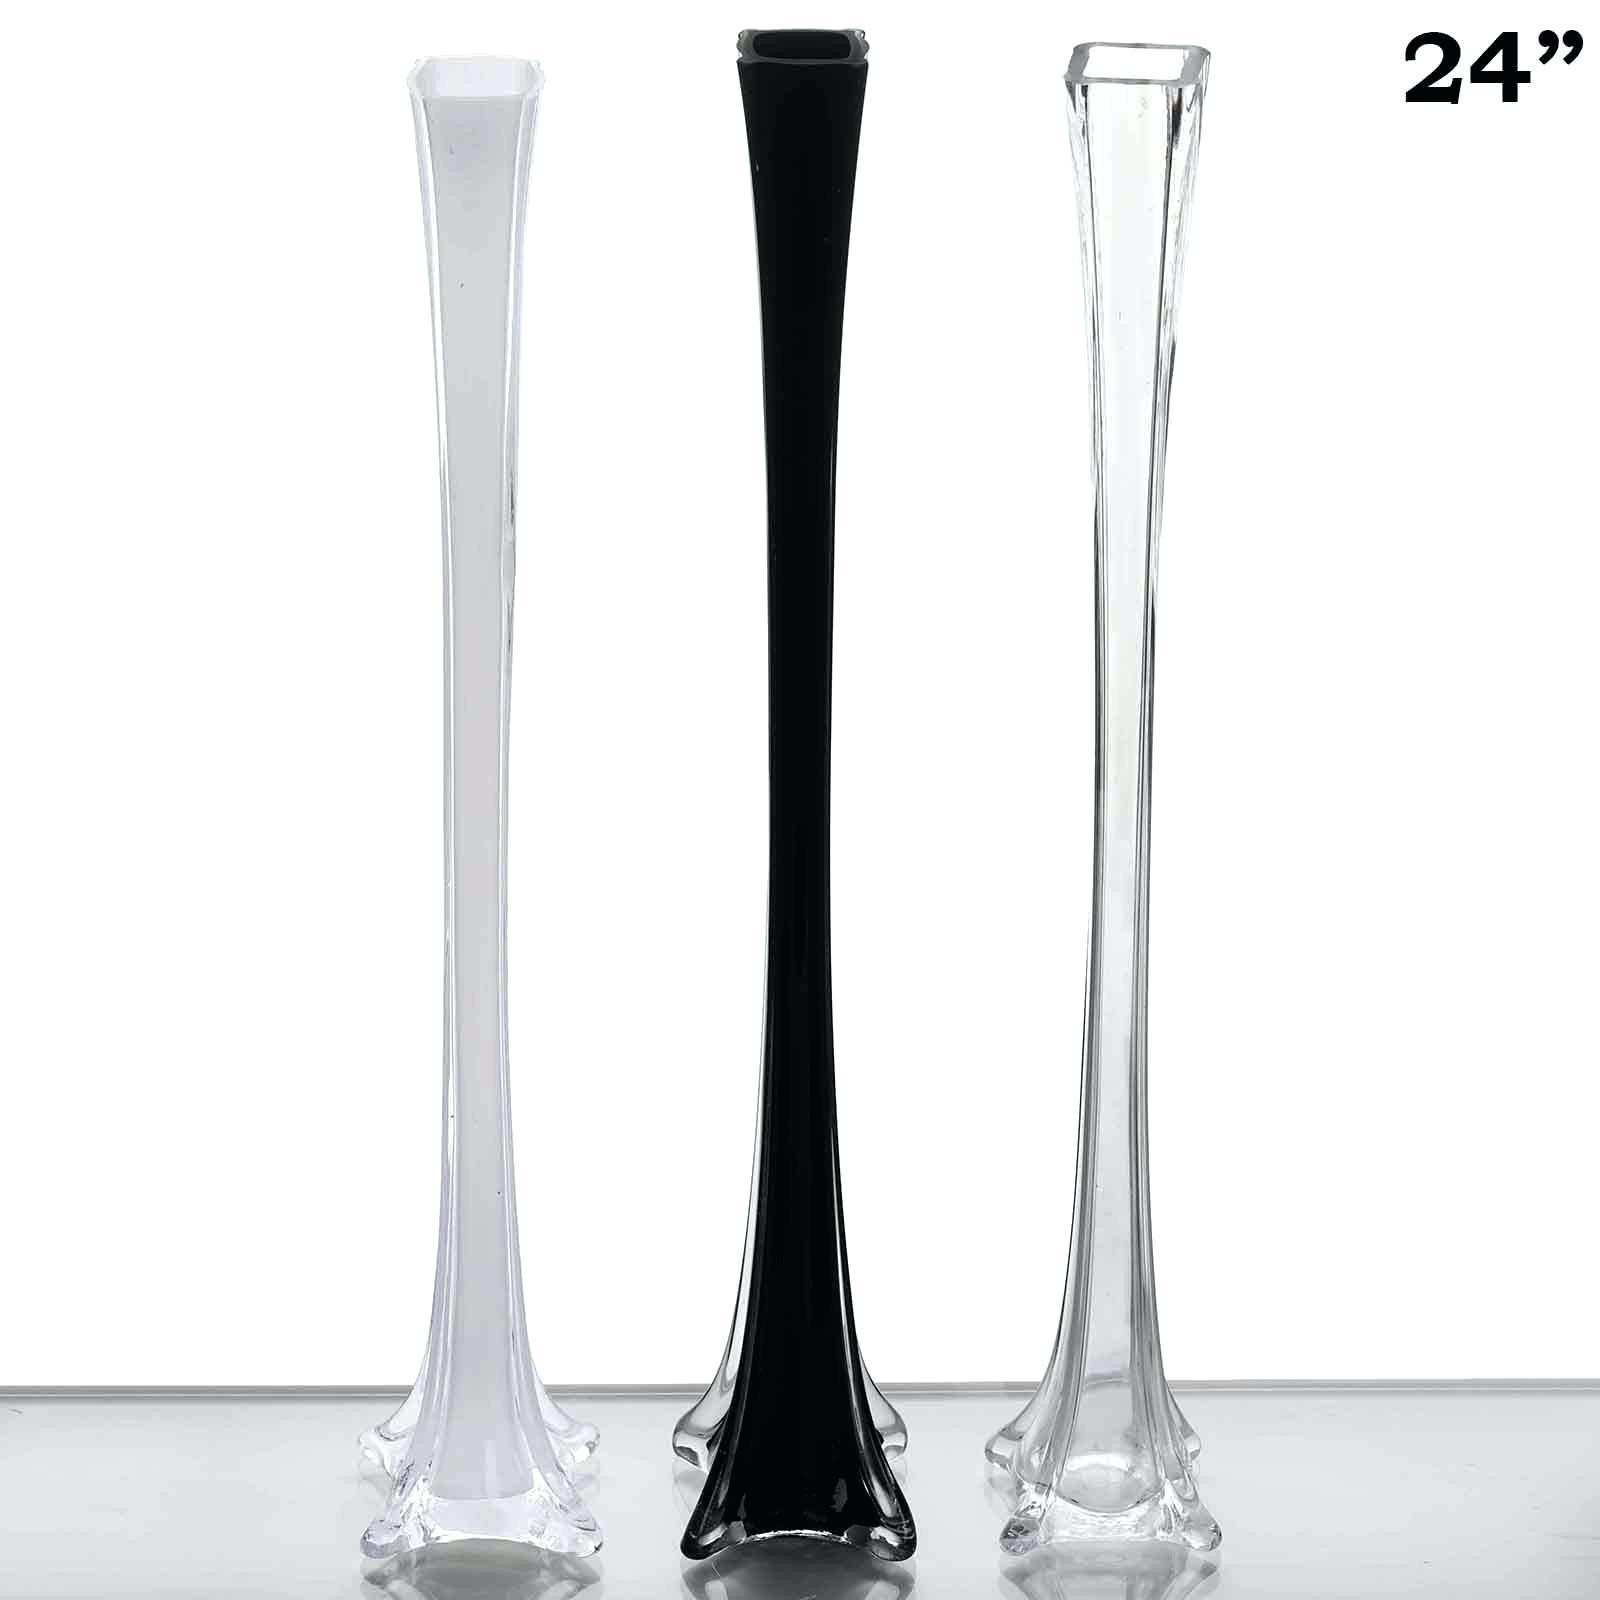 29 Unique Glass Cylinder Vases Bulk 24 2024 free download glass cylinder vases bulk 24 of glass vases with lids collection 24 inch vases bulk 23 5 flared pertaining to glass vases with lids images fantastic chair decor ideas from living room vases 